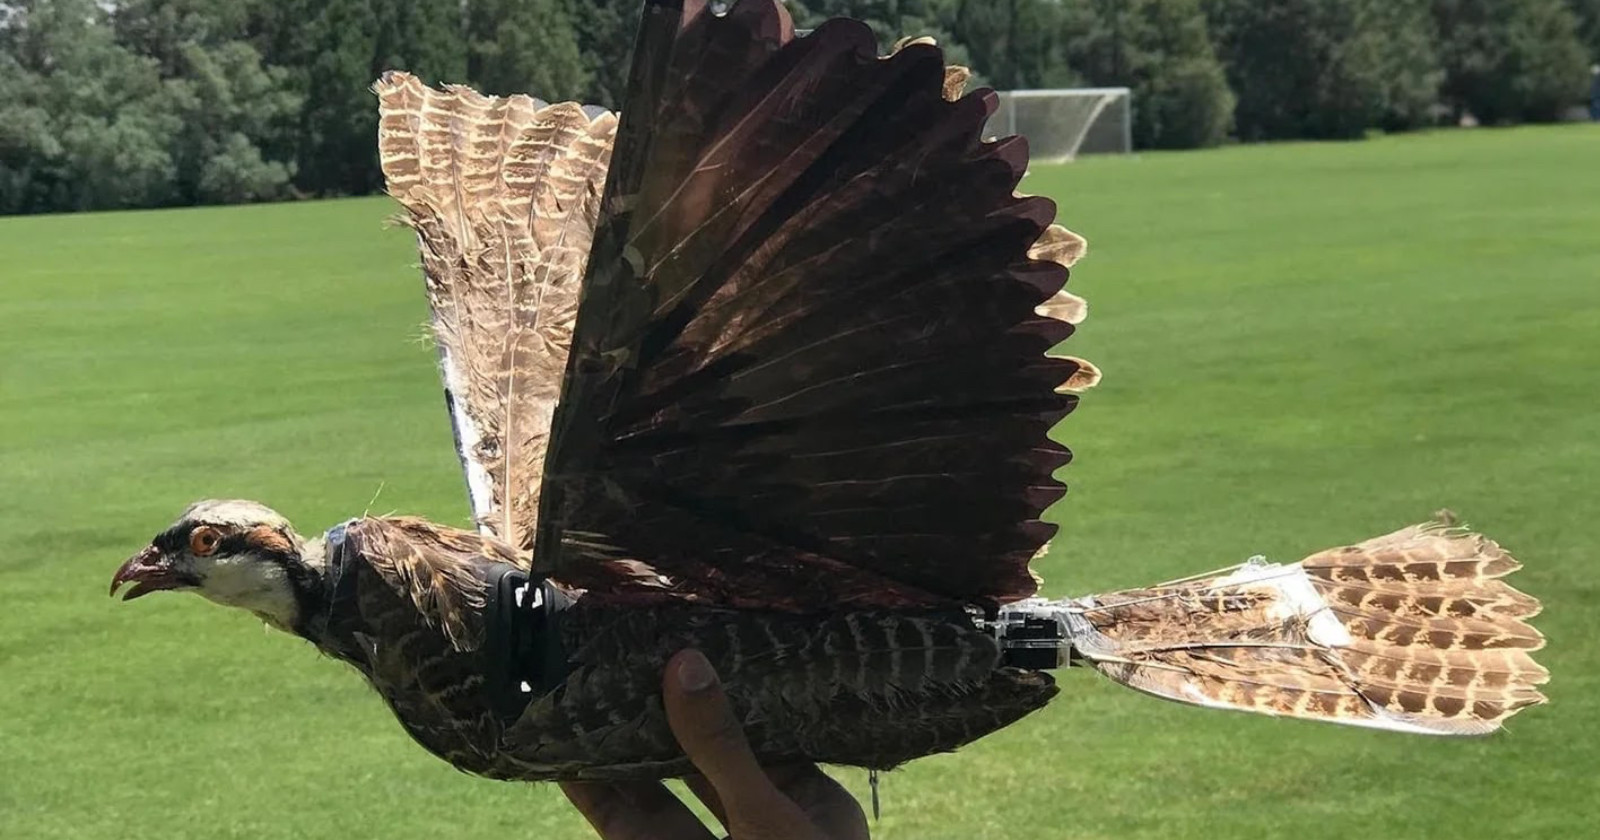 Researchers Turn Dead Birds into Drones That Could Spy On People